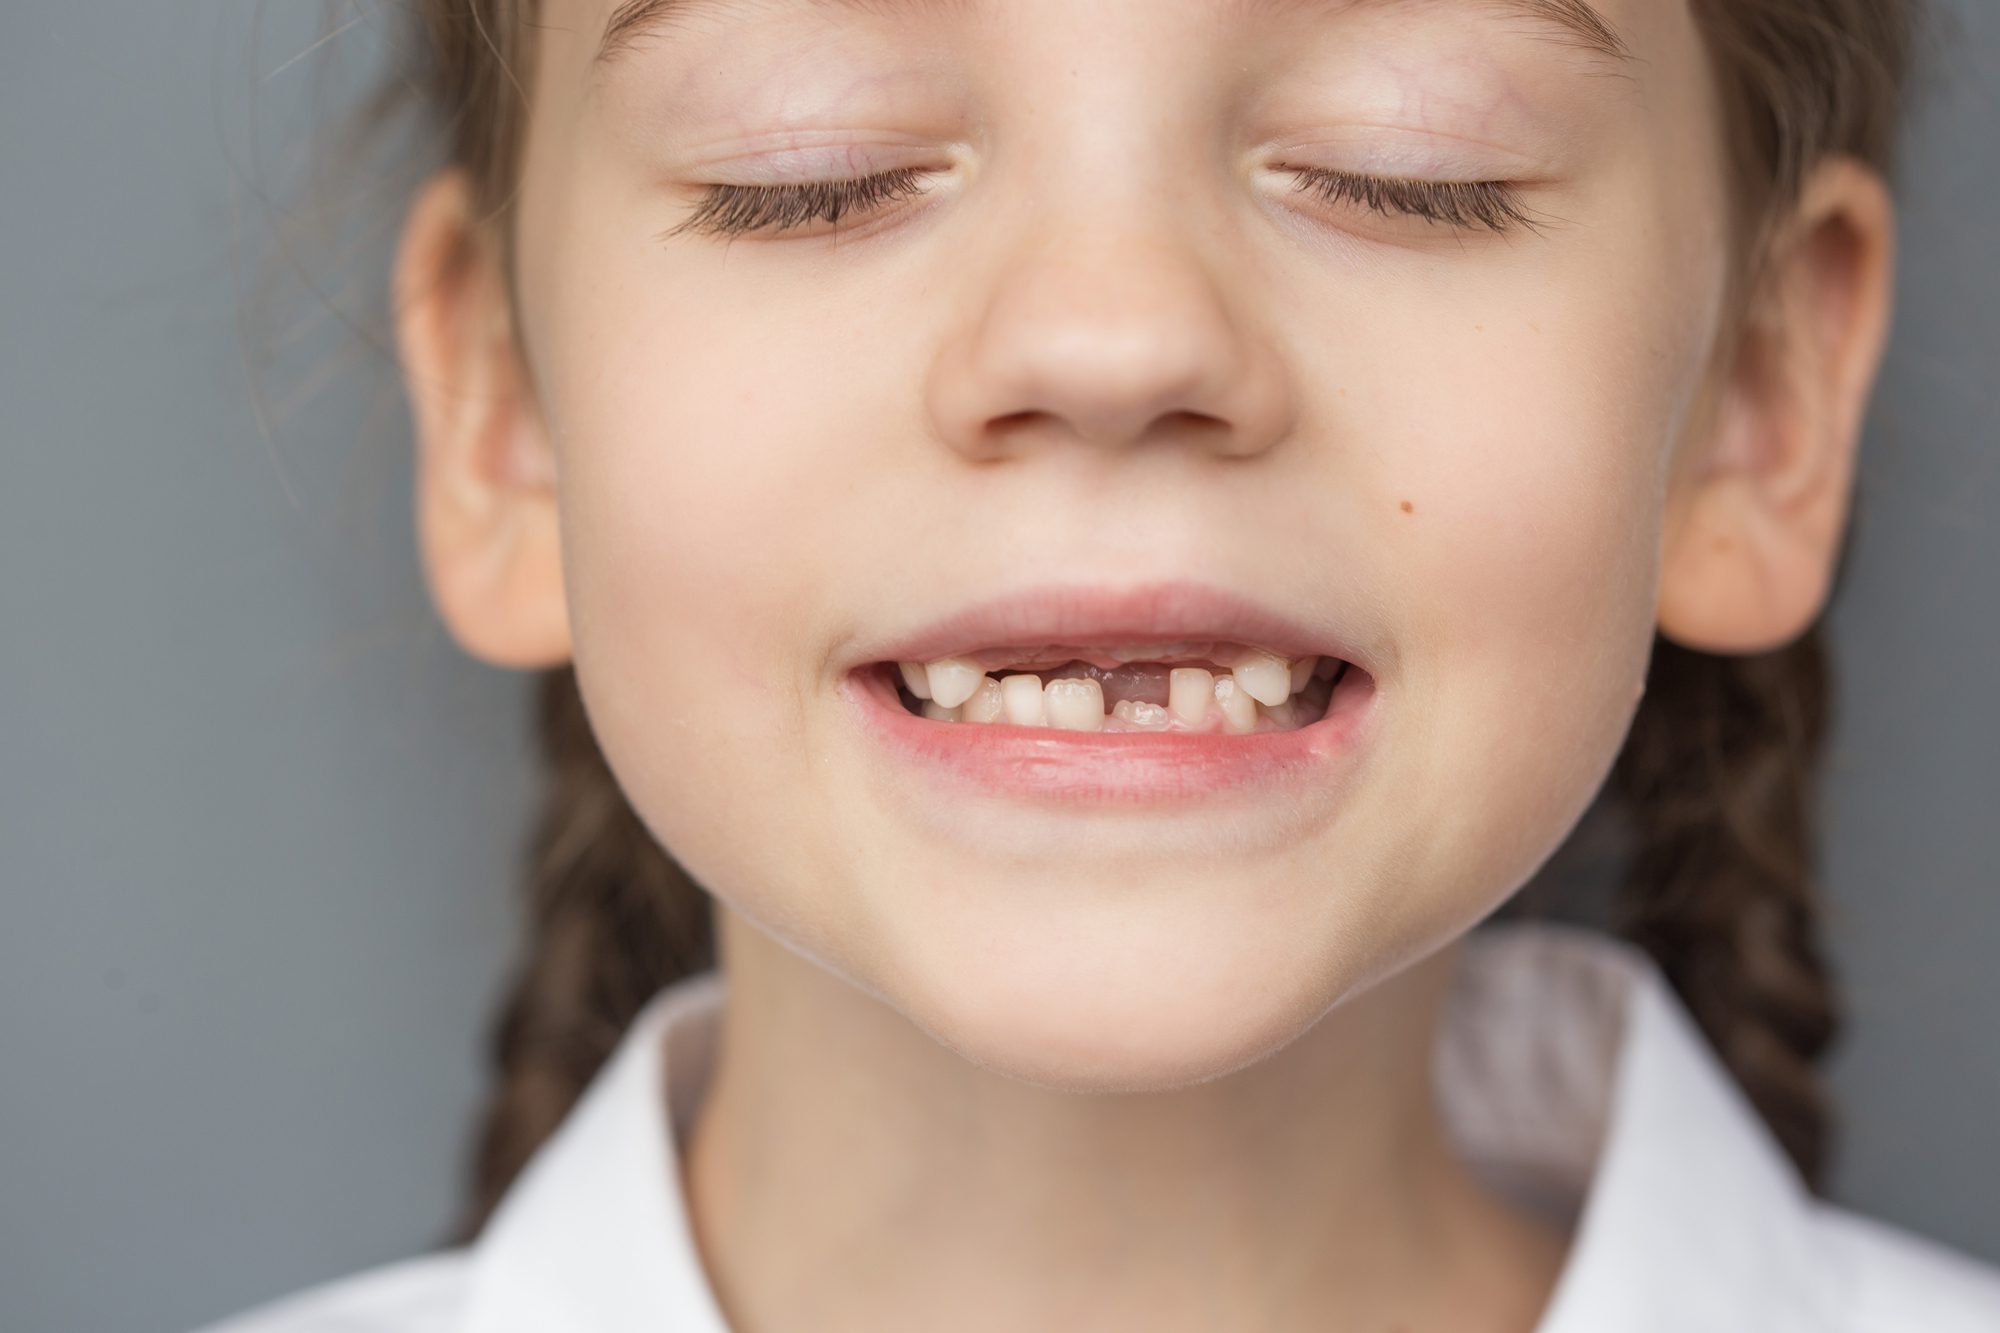 young girl showing off emerging adult teeth is a part of pediatric dentistry